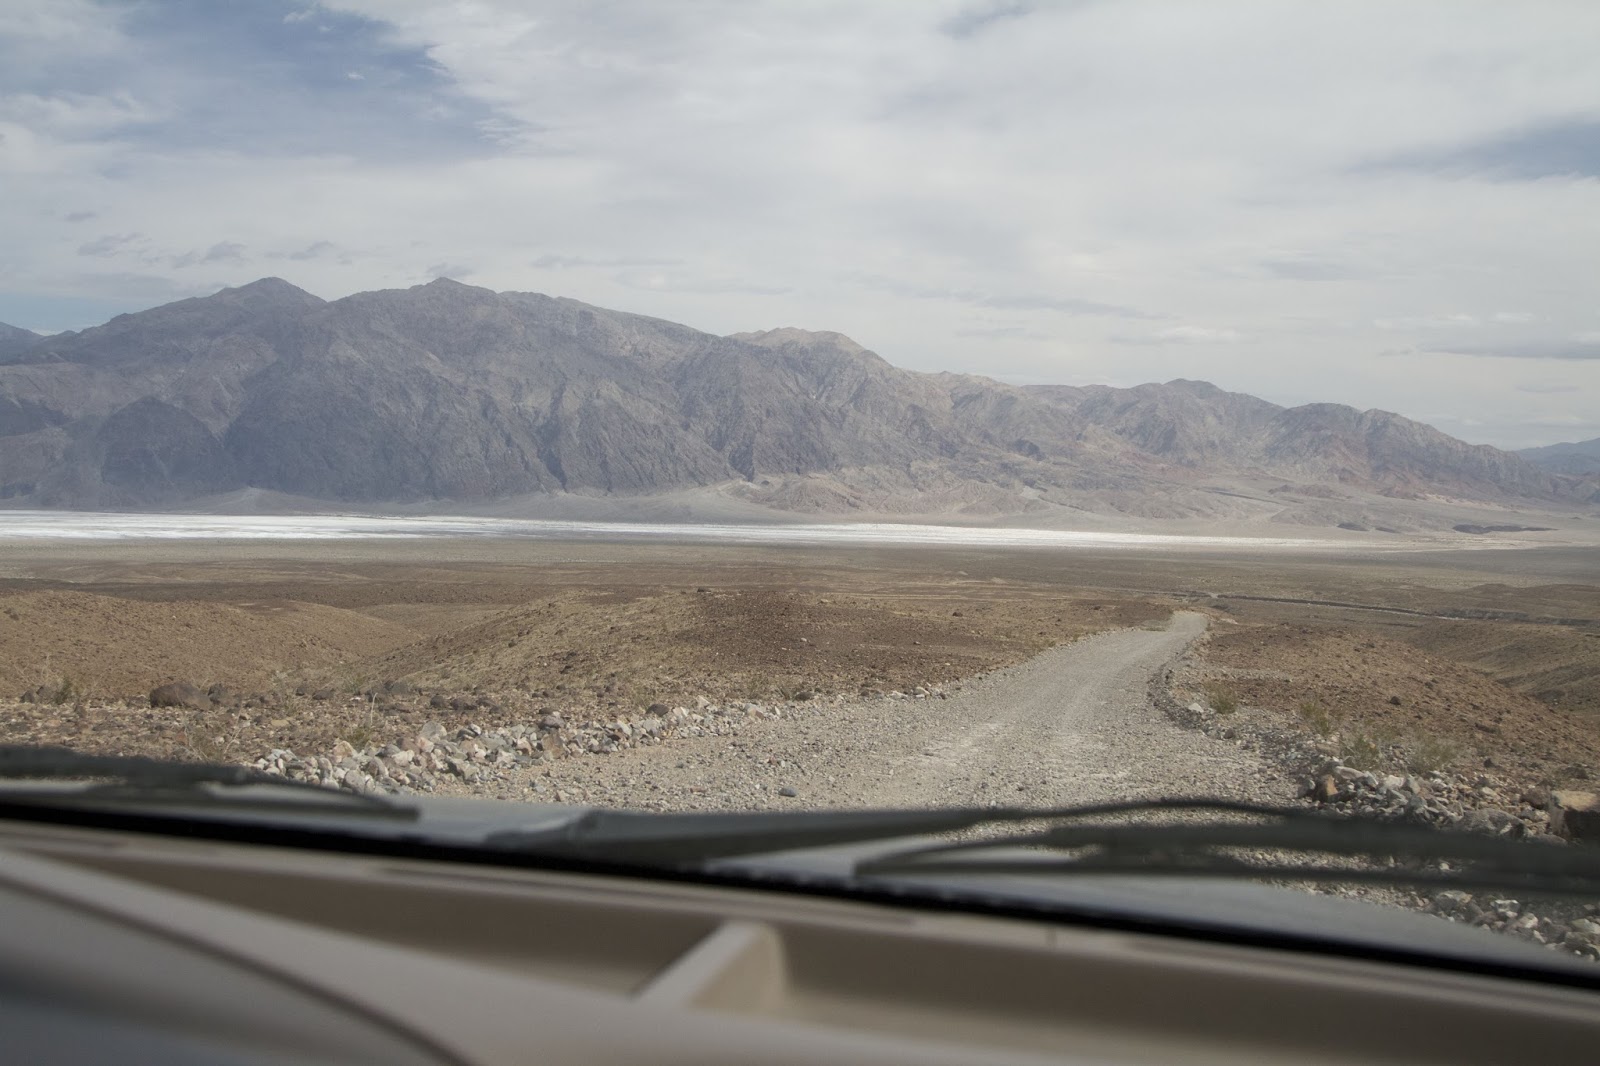 Stranded with a Flat Deep in Death Valley on Racetrack Valley Road